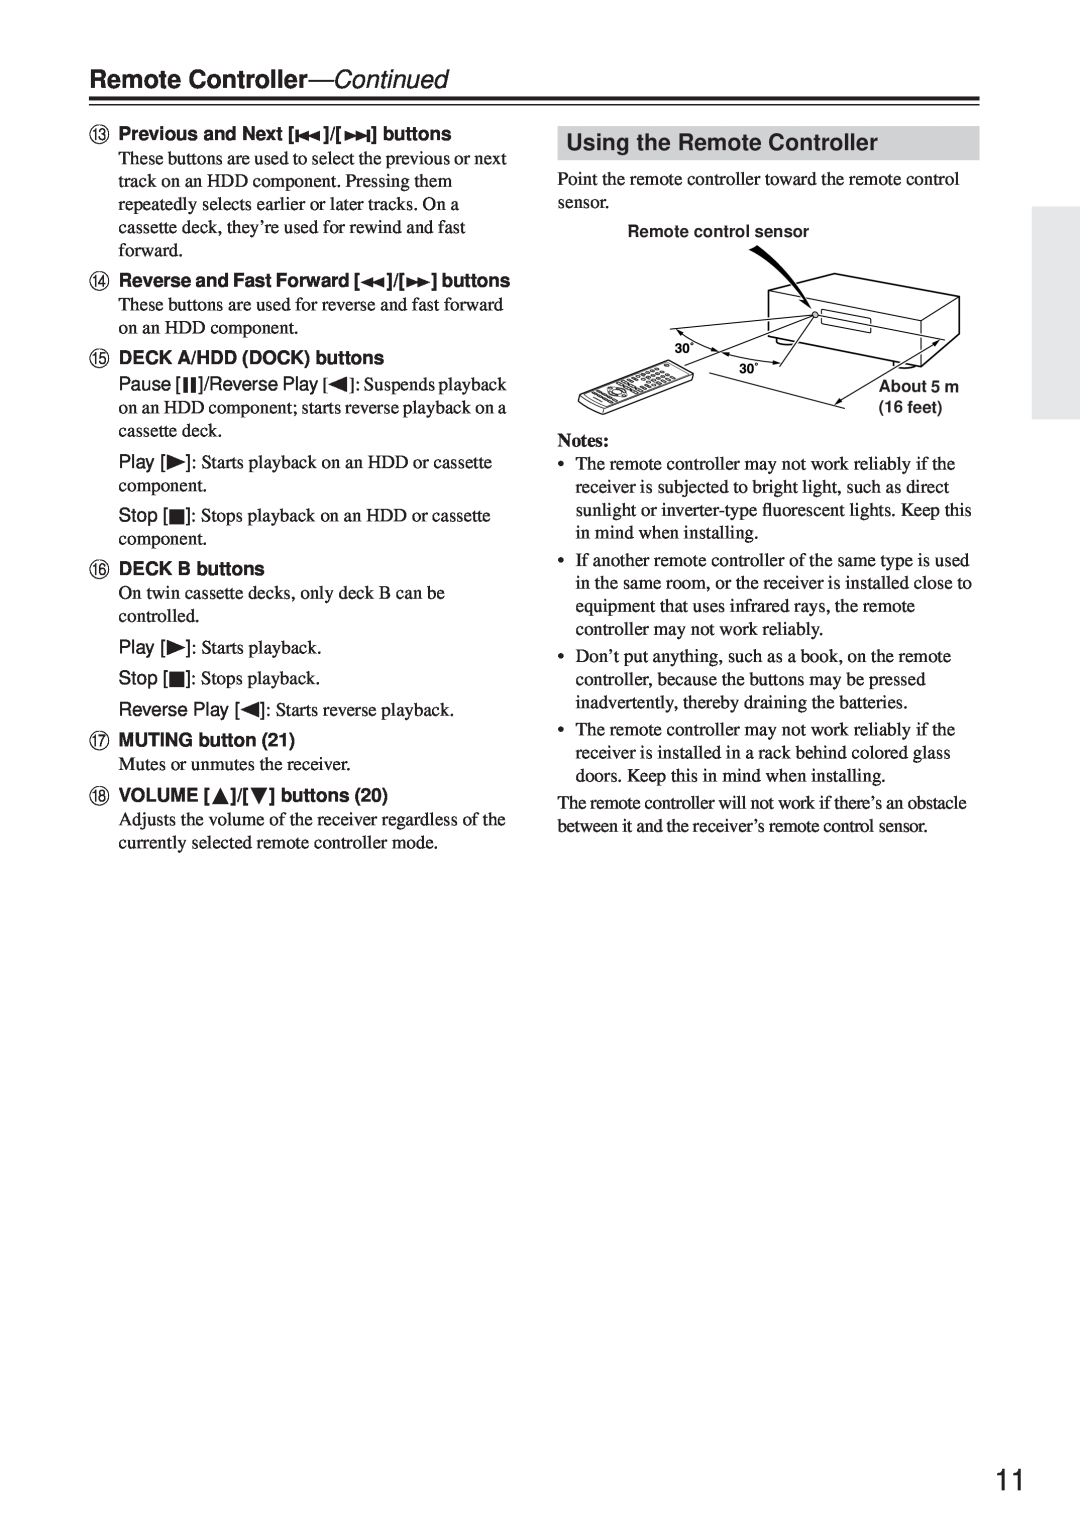 Onkyo TX-8255 instruction manual Remote Controller-Continued, Using the Remote Controller 